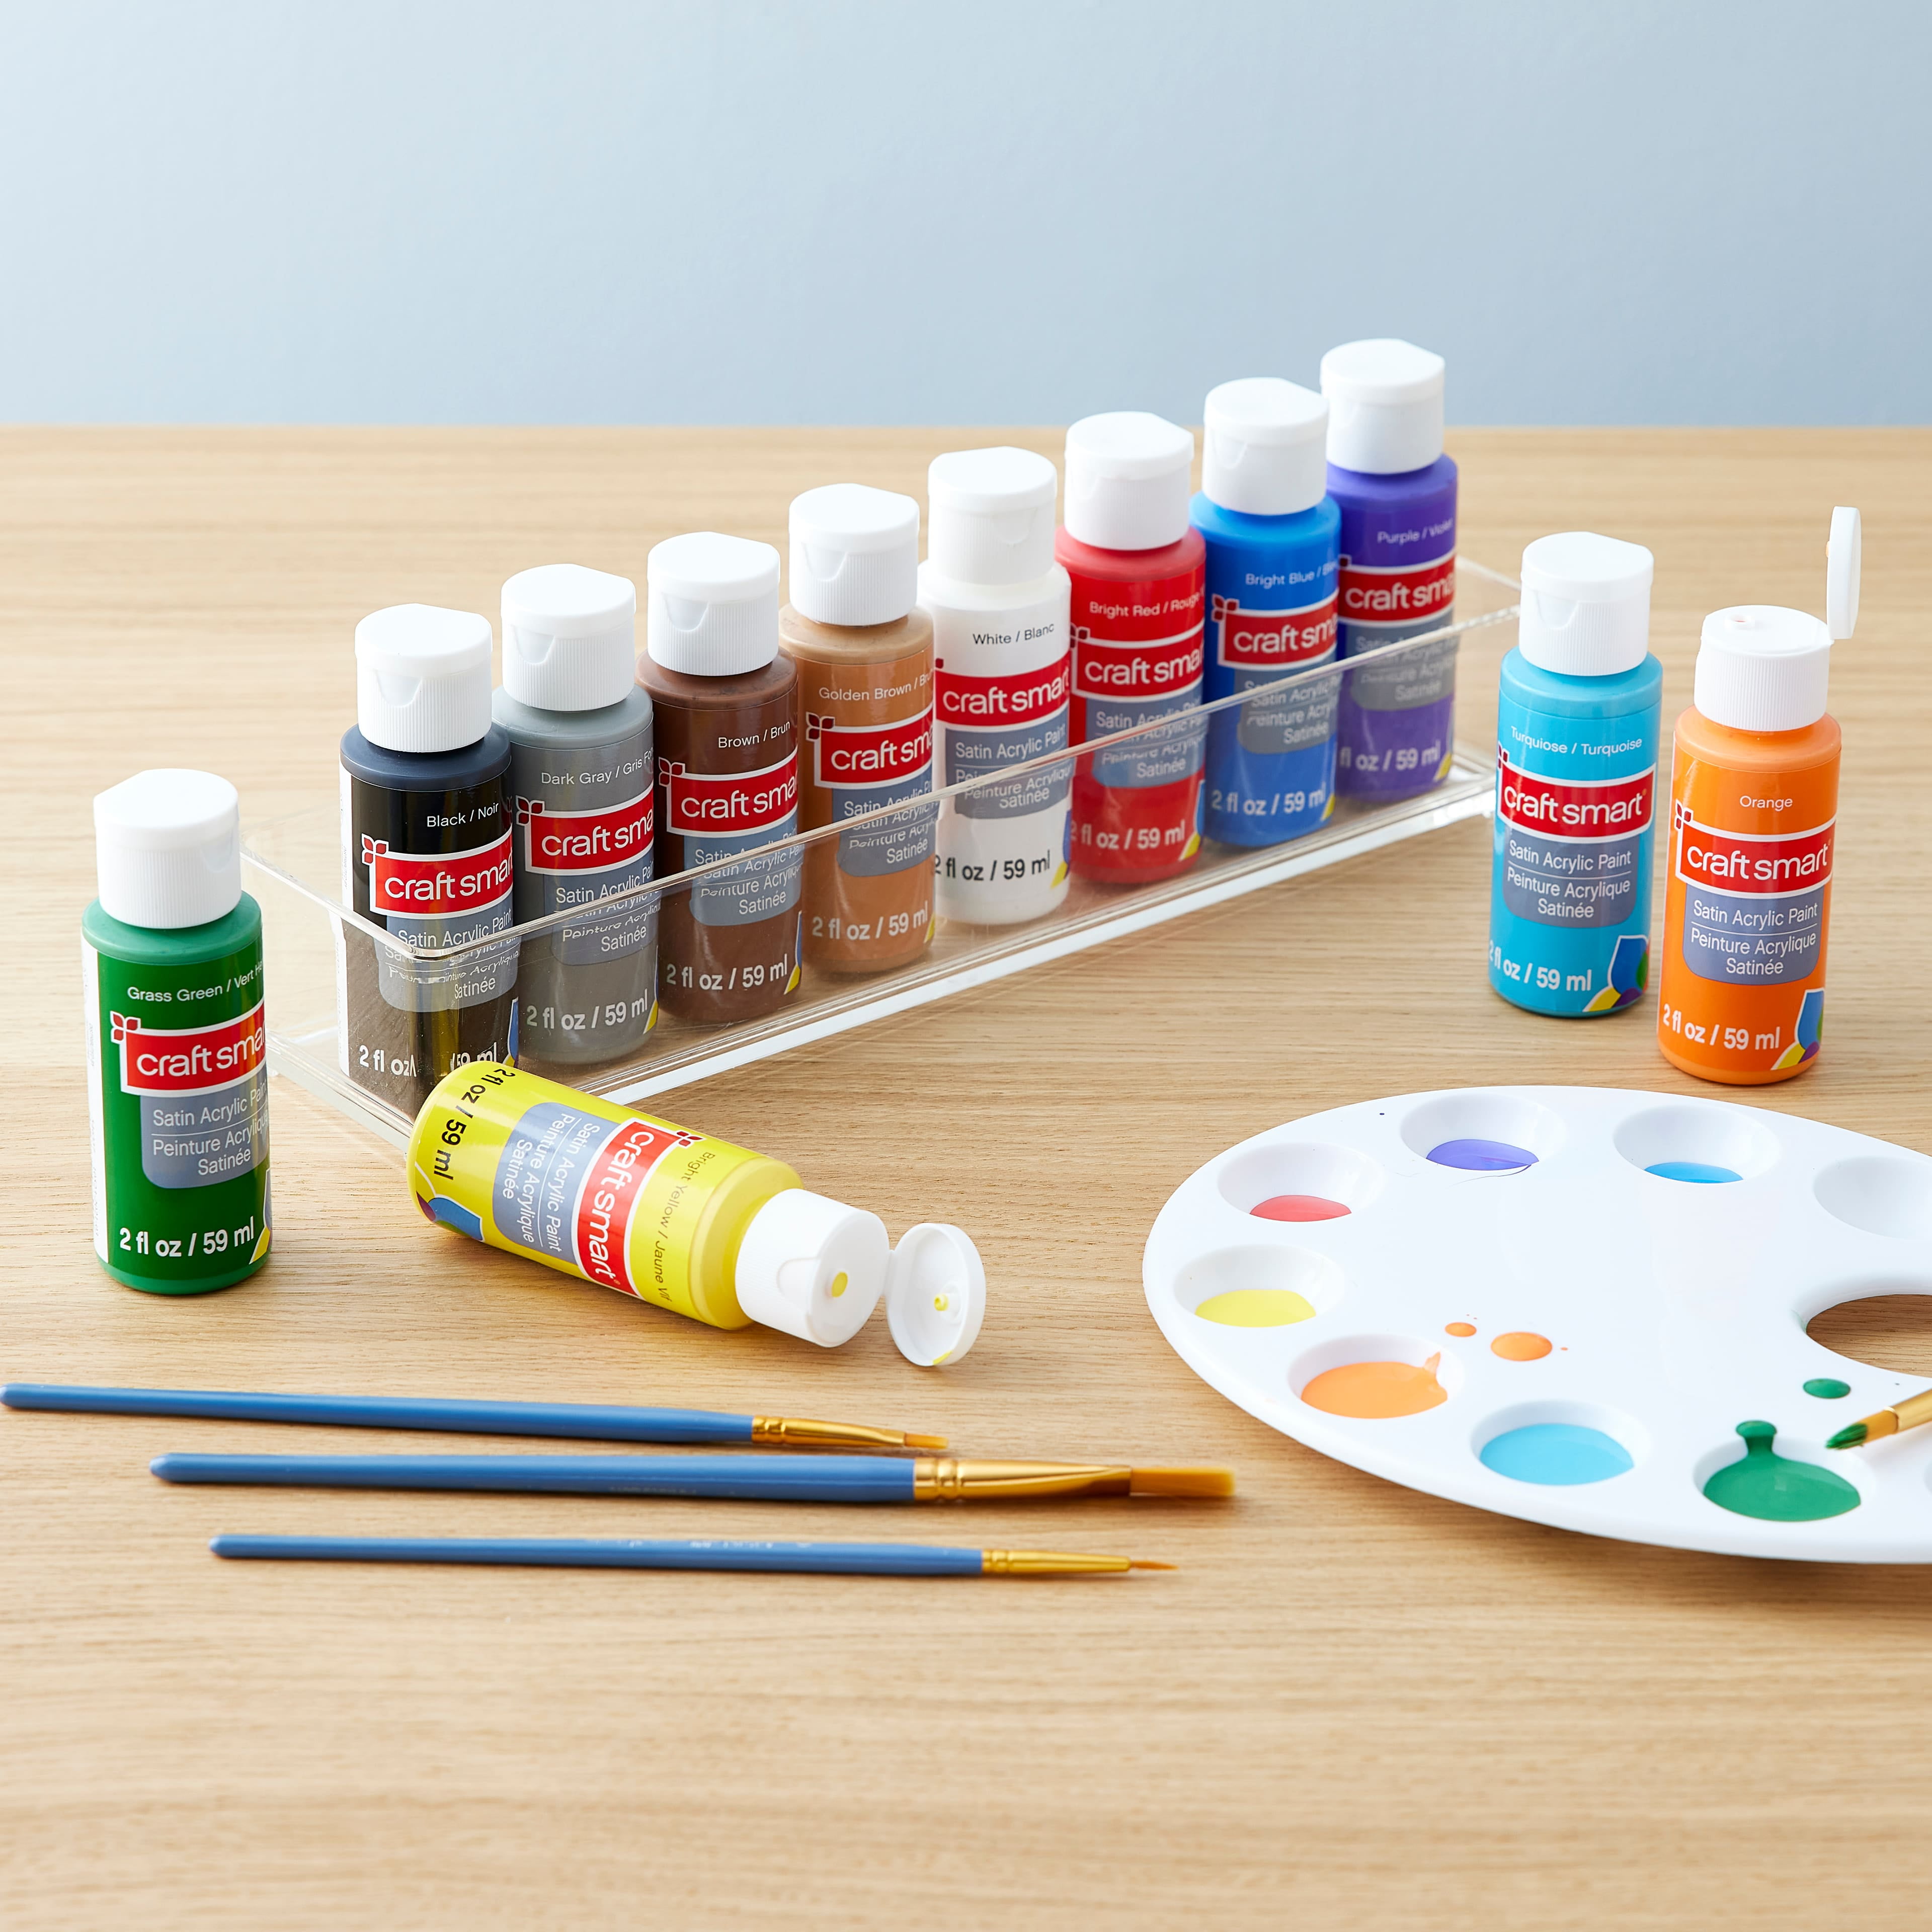 Buy Acrylic Paint Medium Value Pack (Kit of 96) at S&S Worldwide